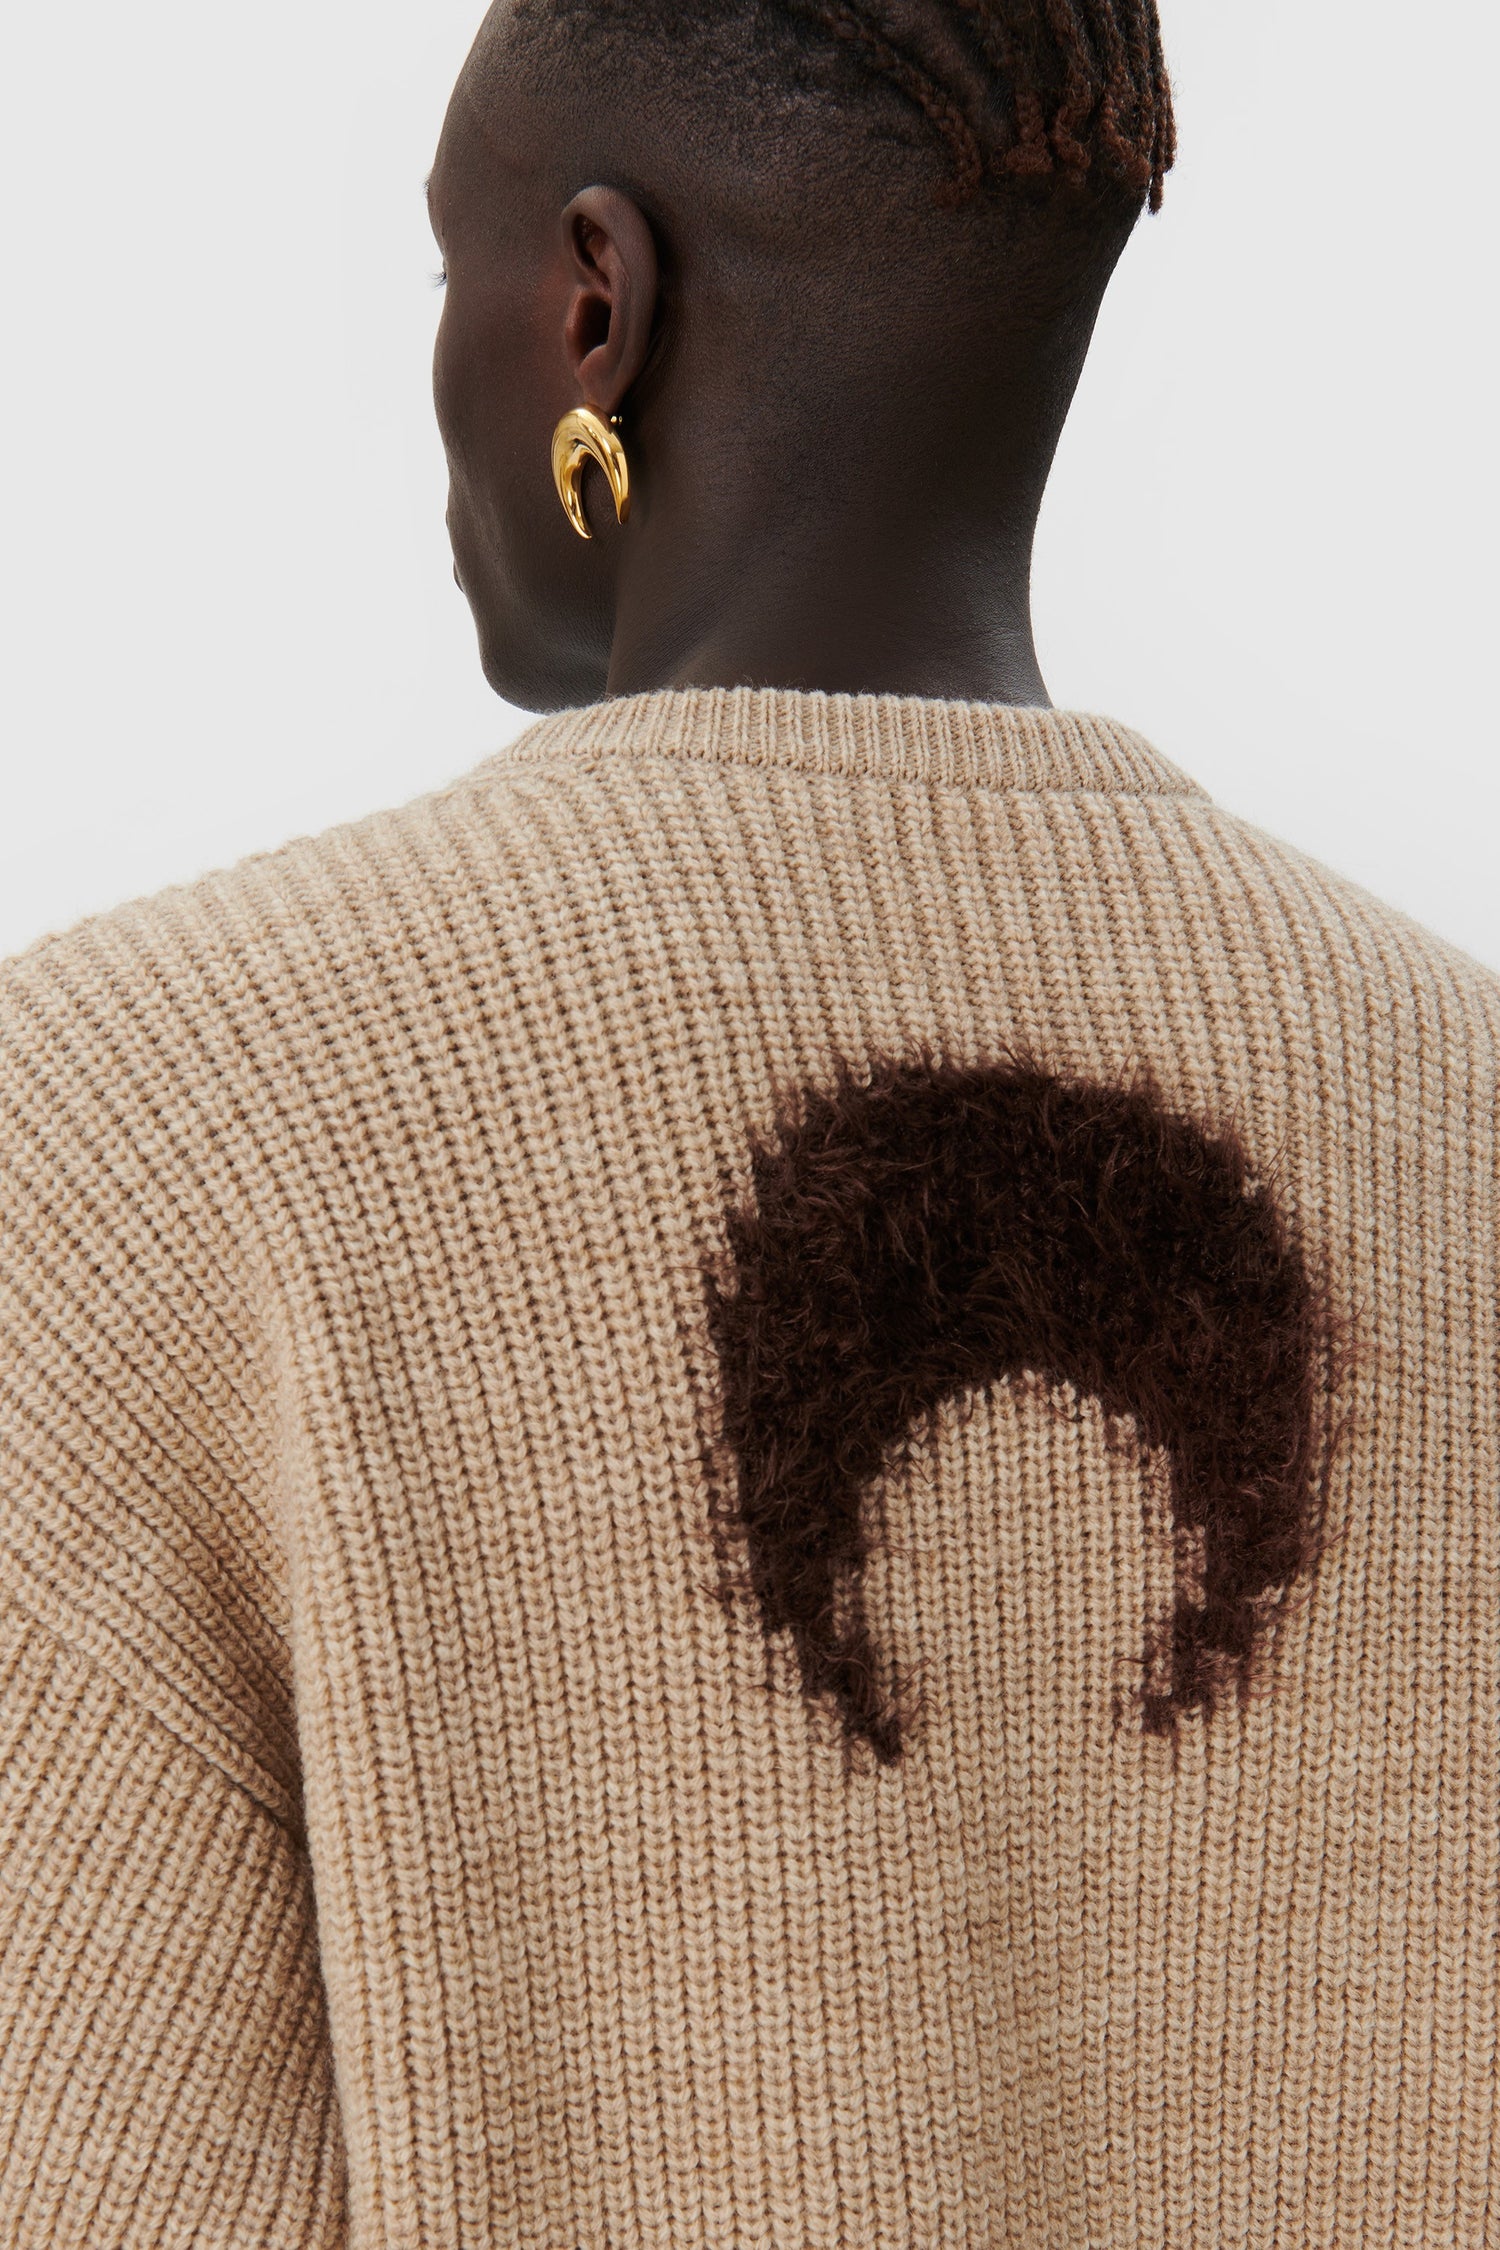 Wool And Fluffy Knit Crewneck Pullover • Marine Serre